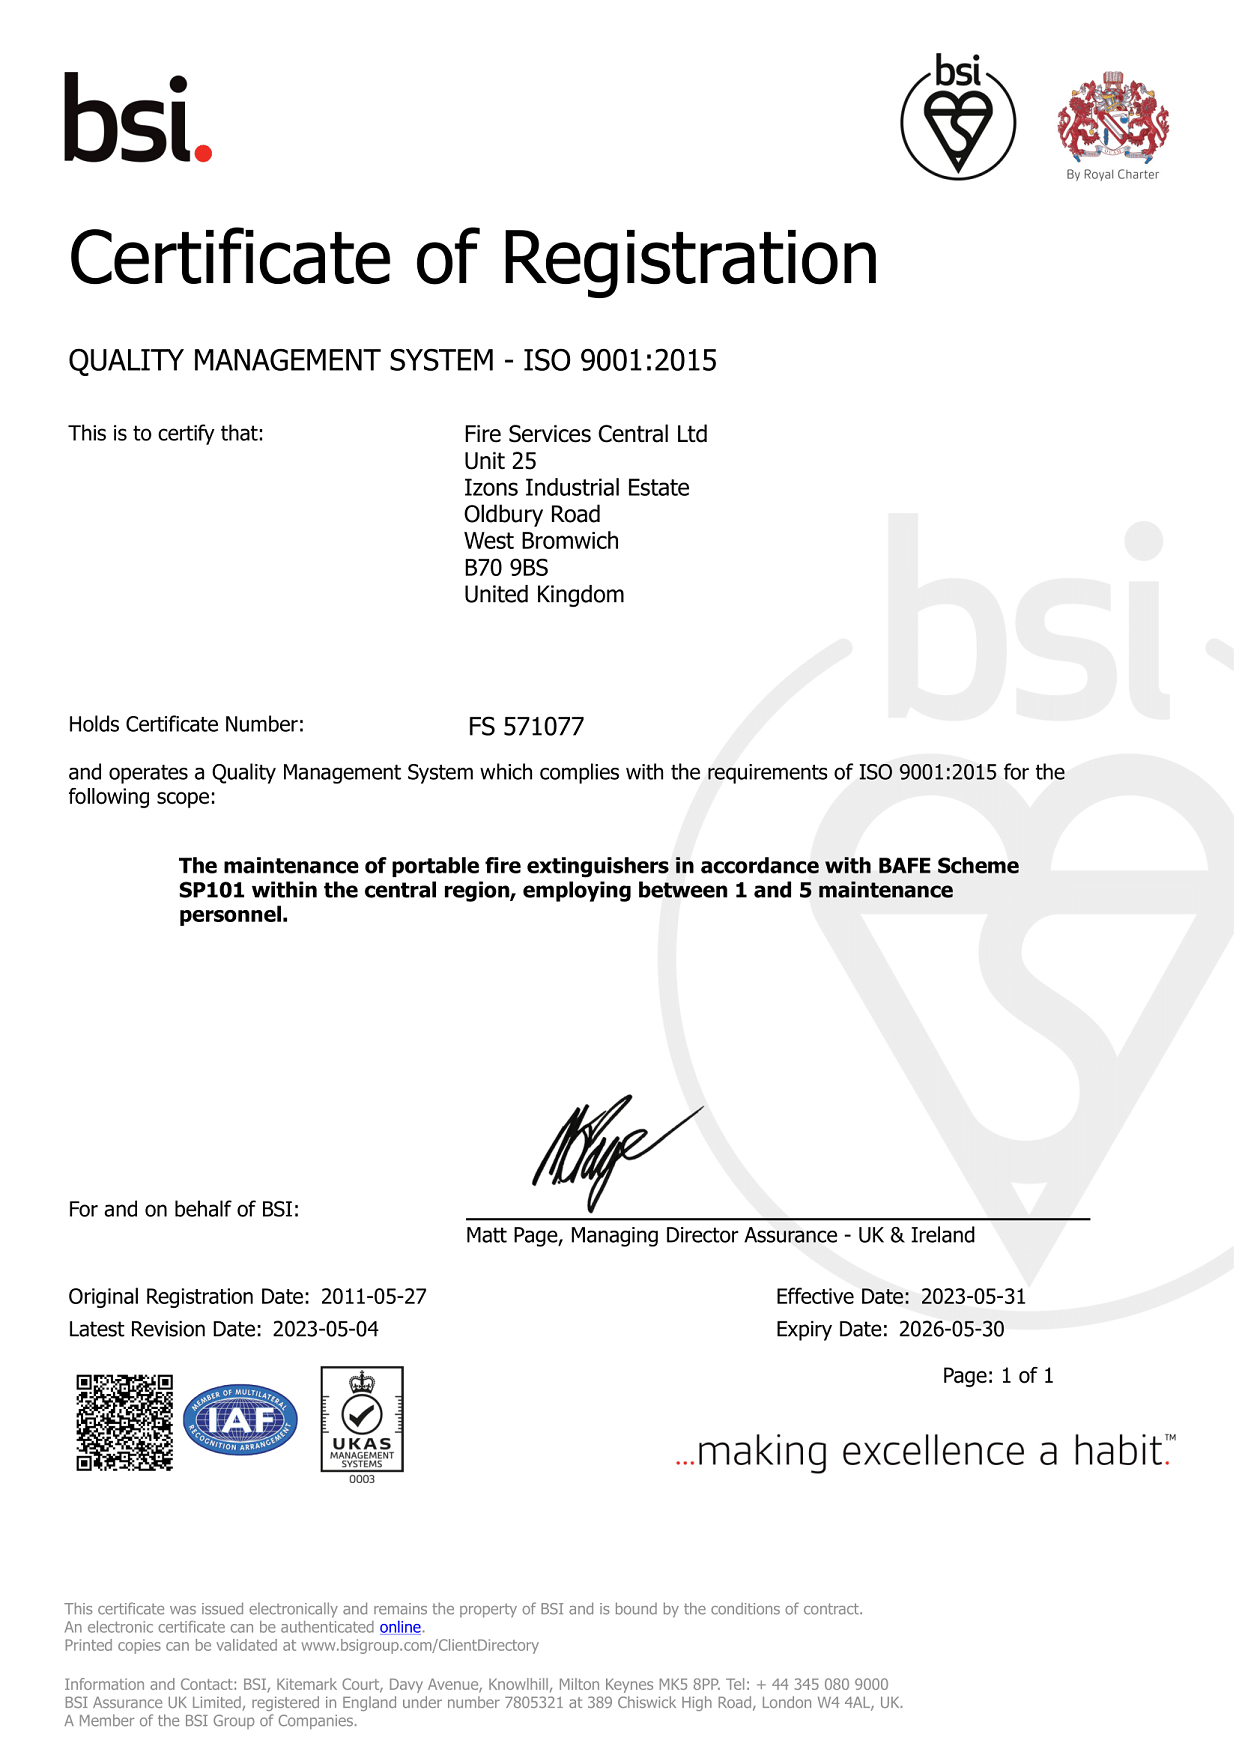 2023-2026 Bsi Quality Management Certificate